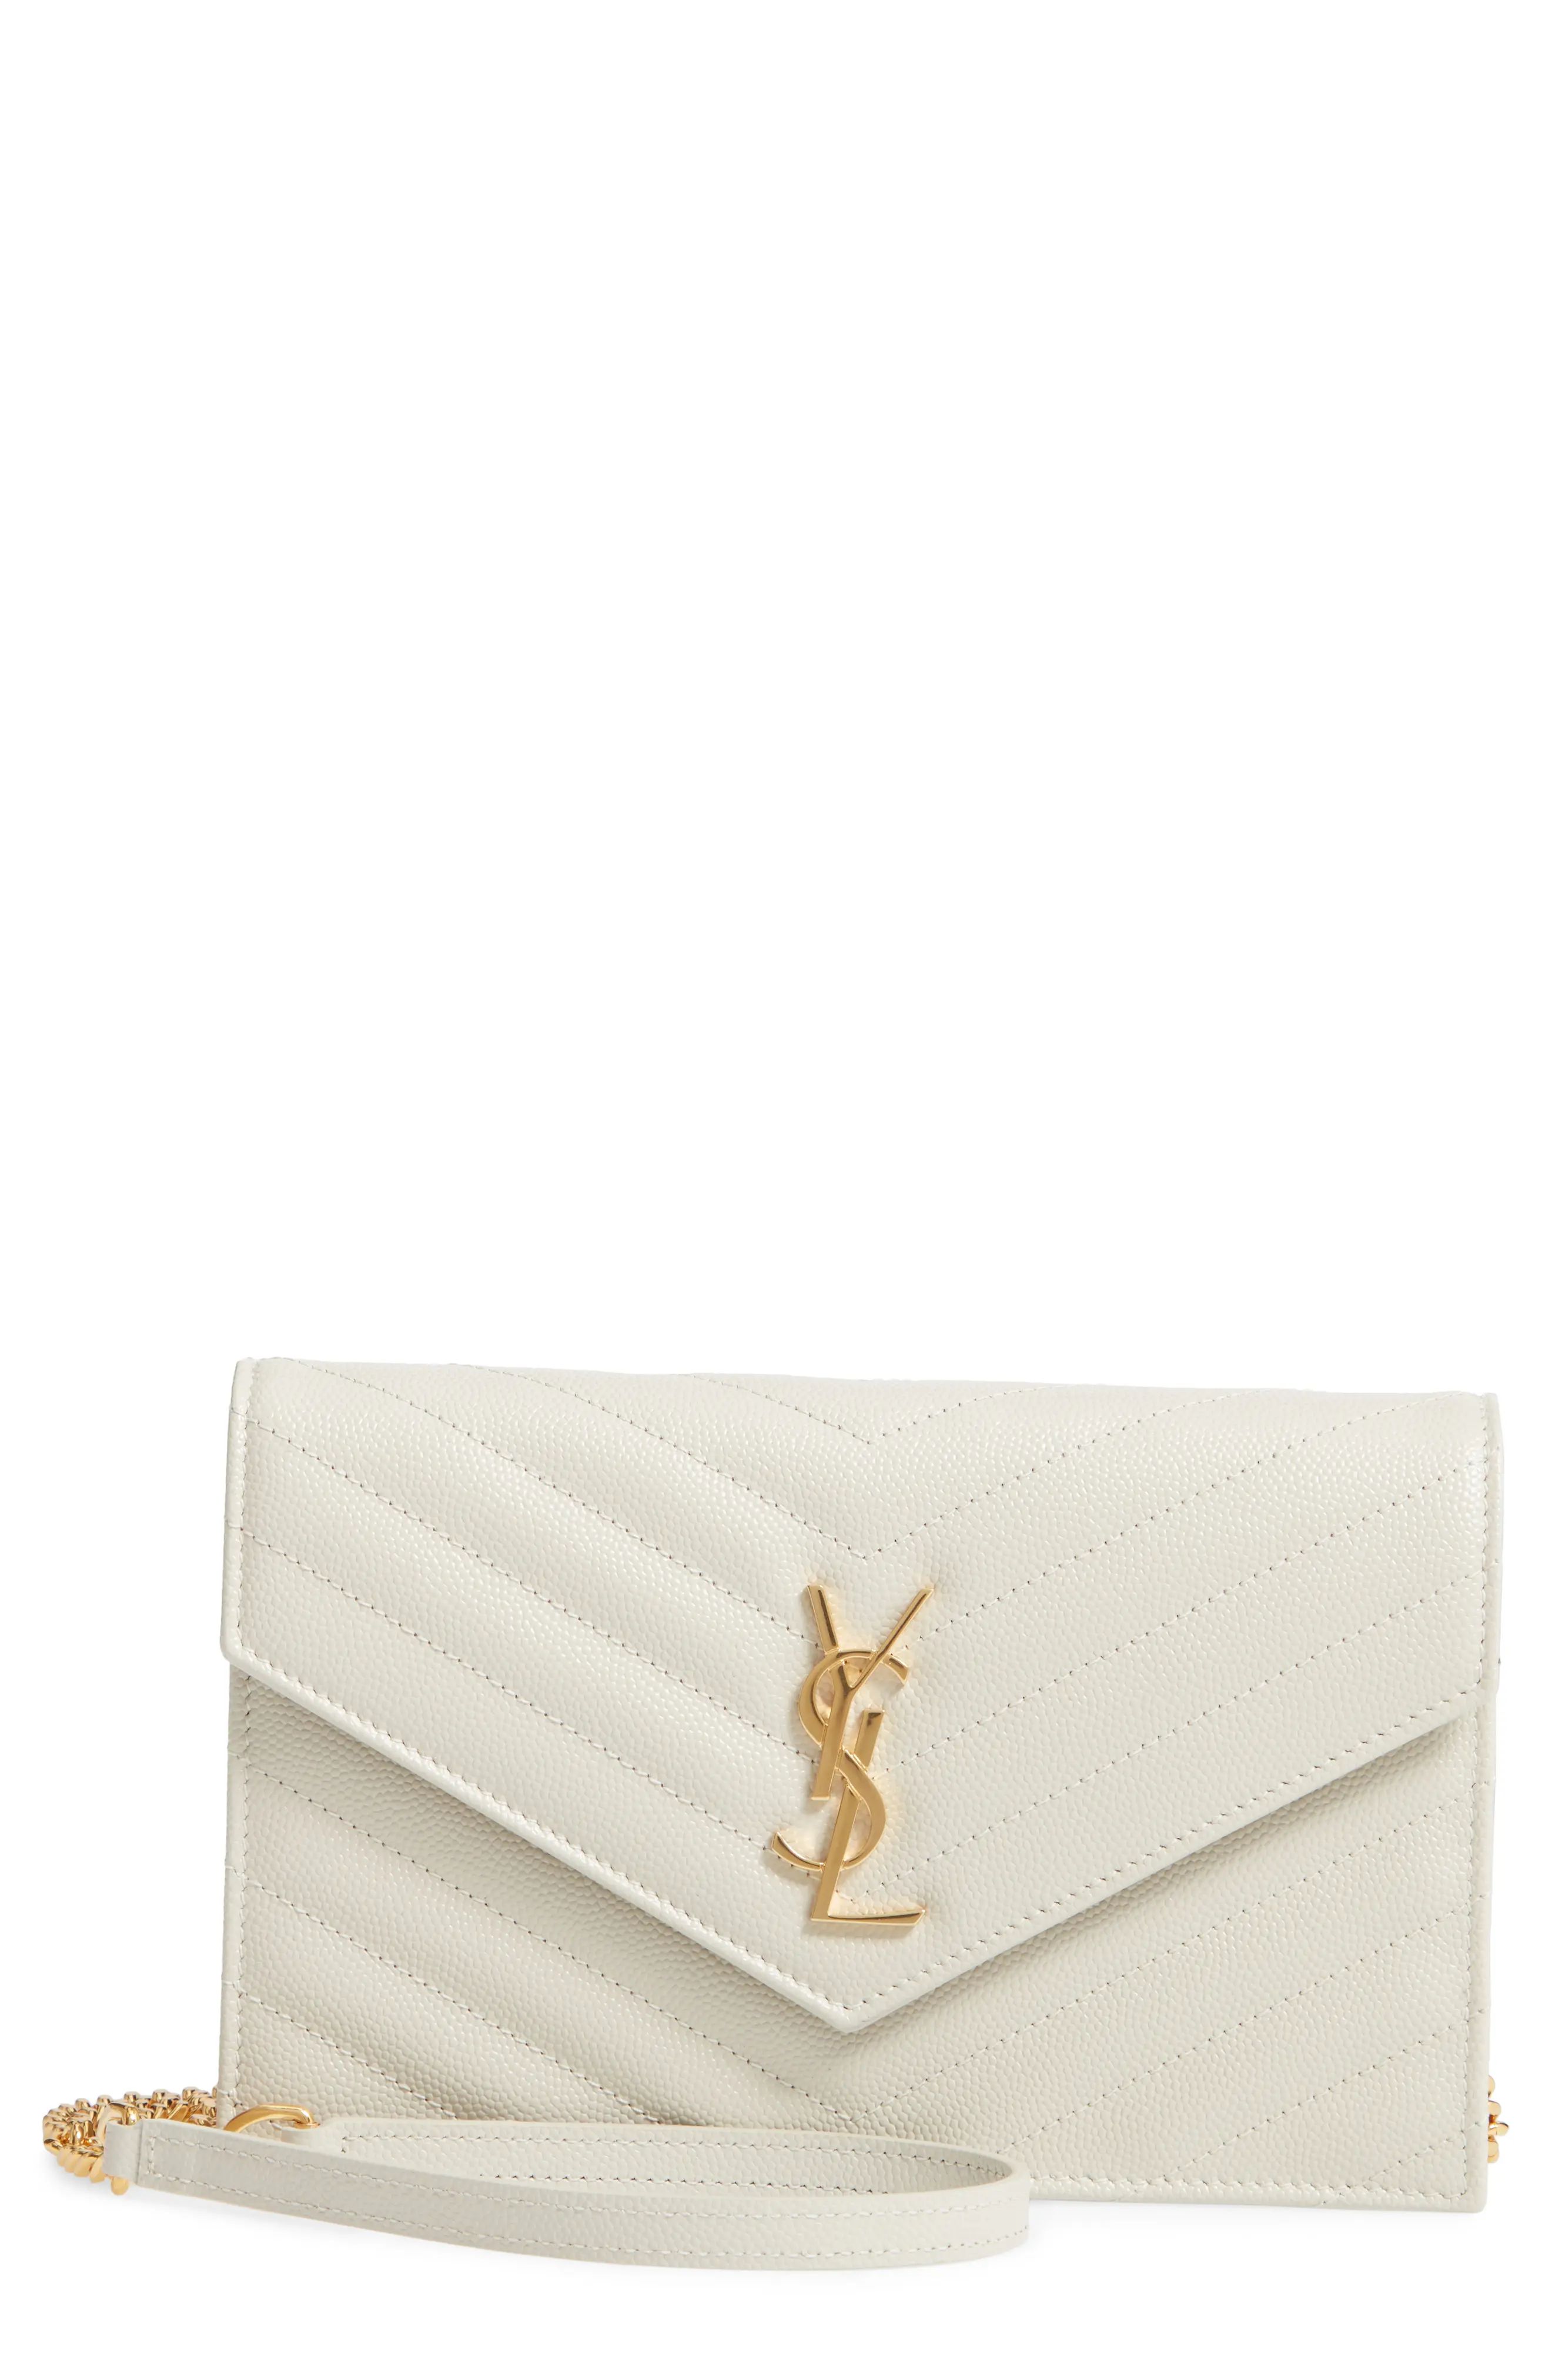 Saint Laurent 'Small Mono' Leather Wallet on a Chain | Nordstrom